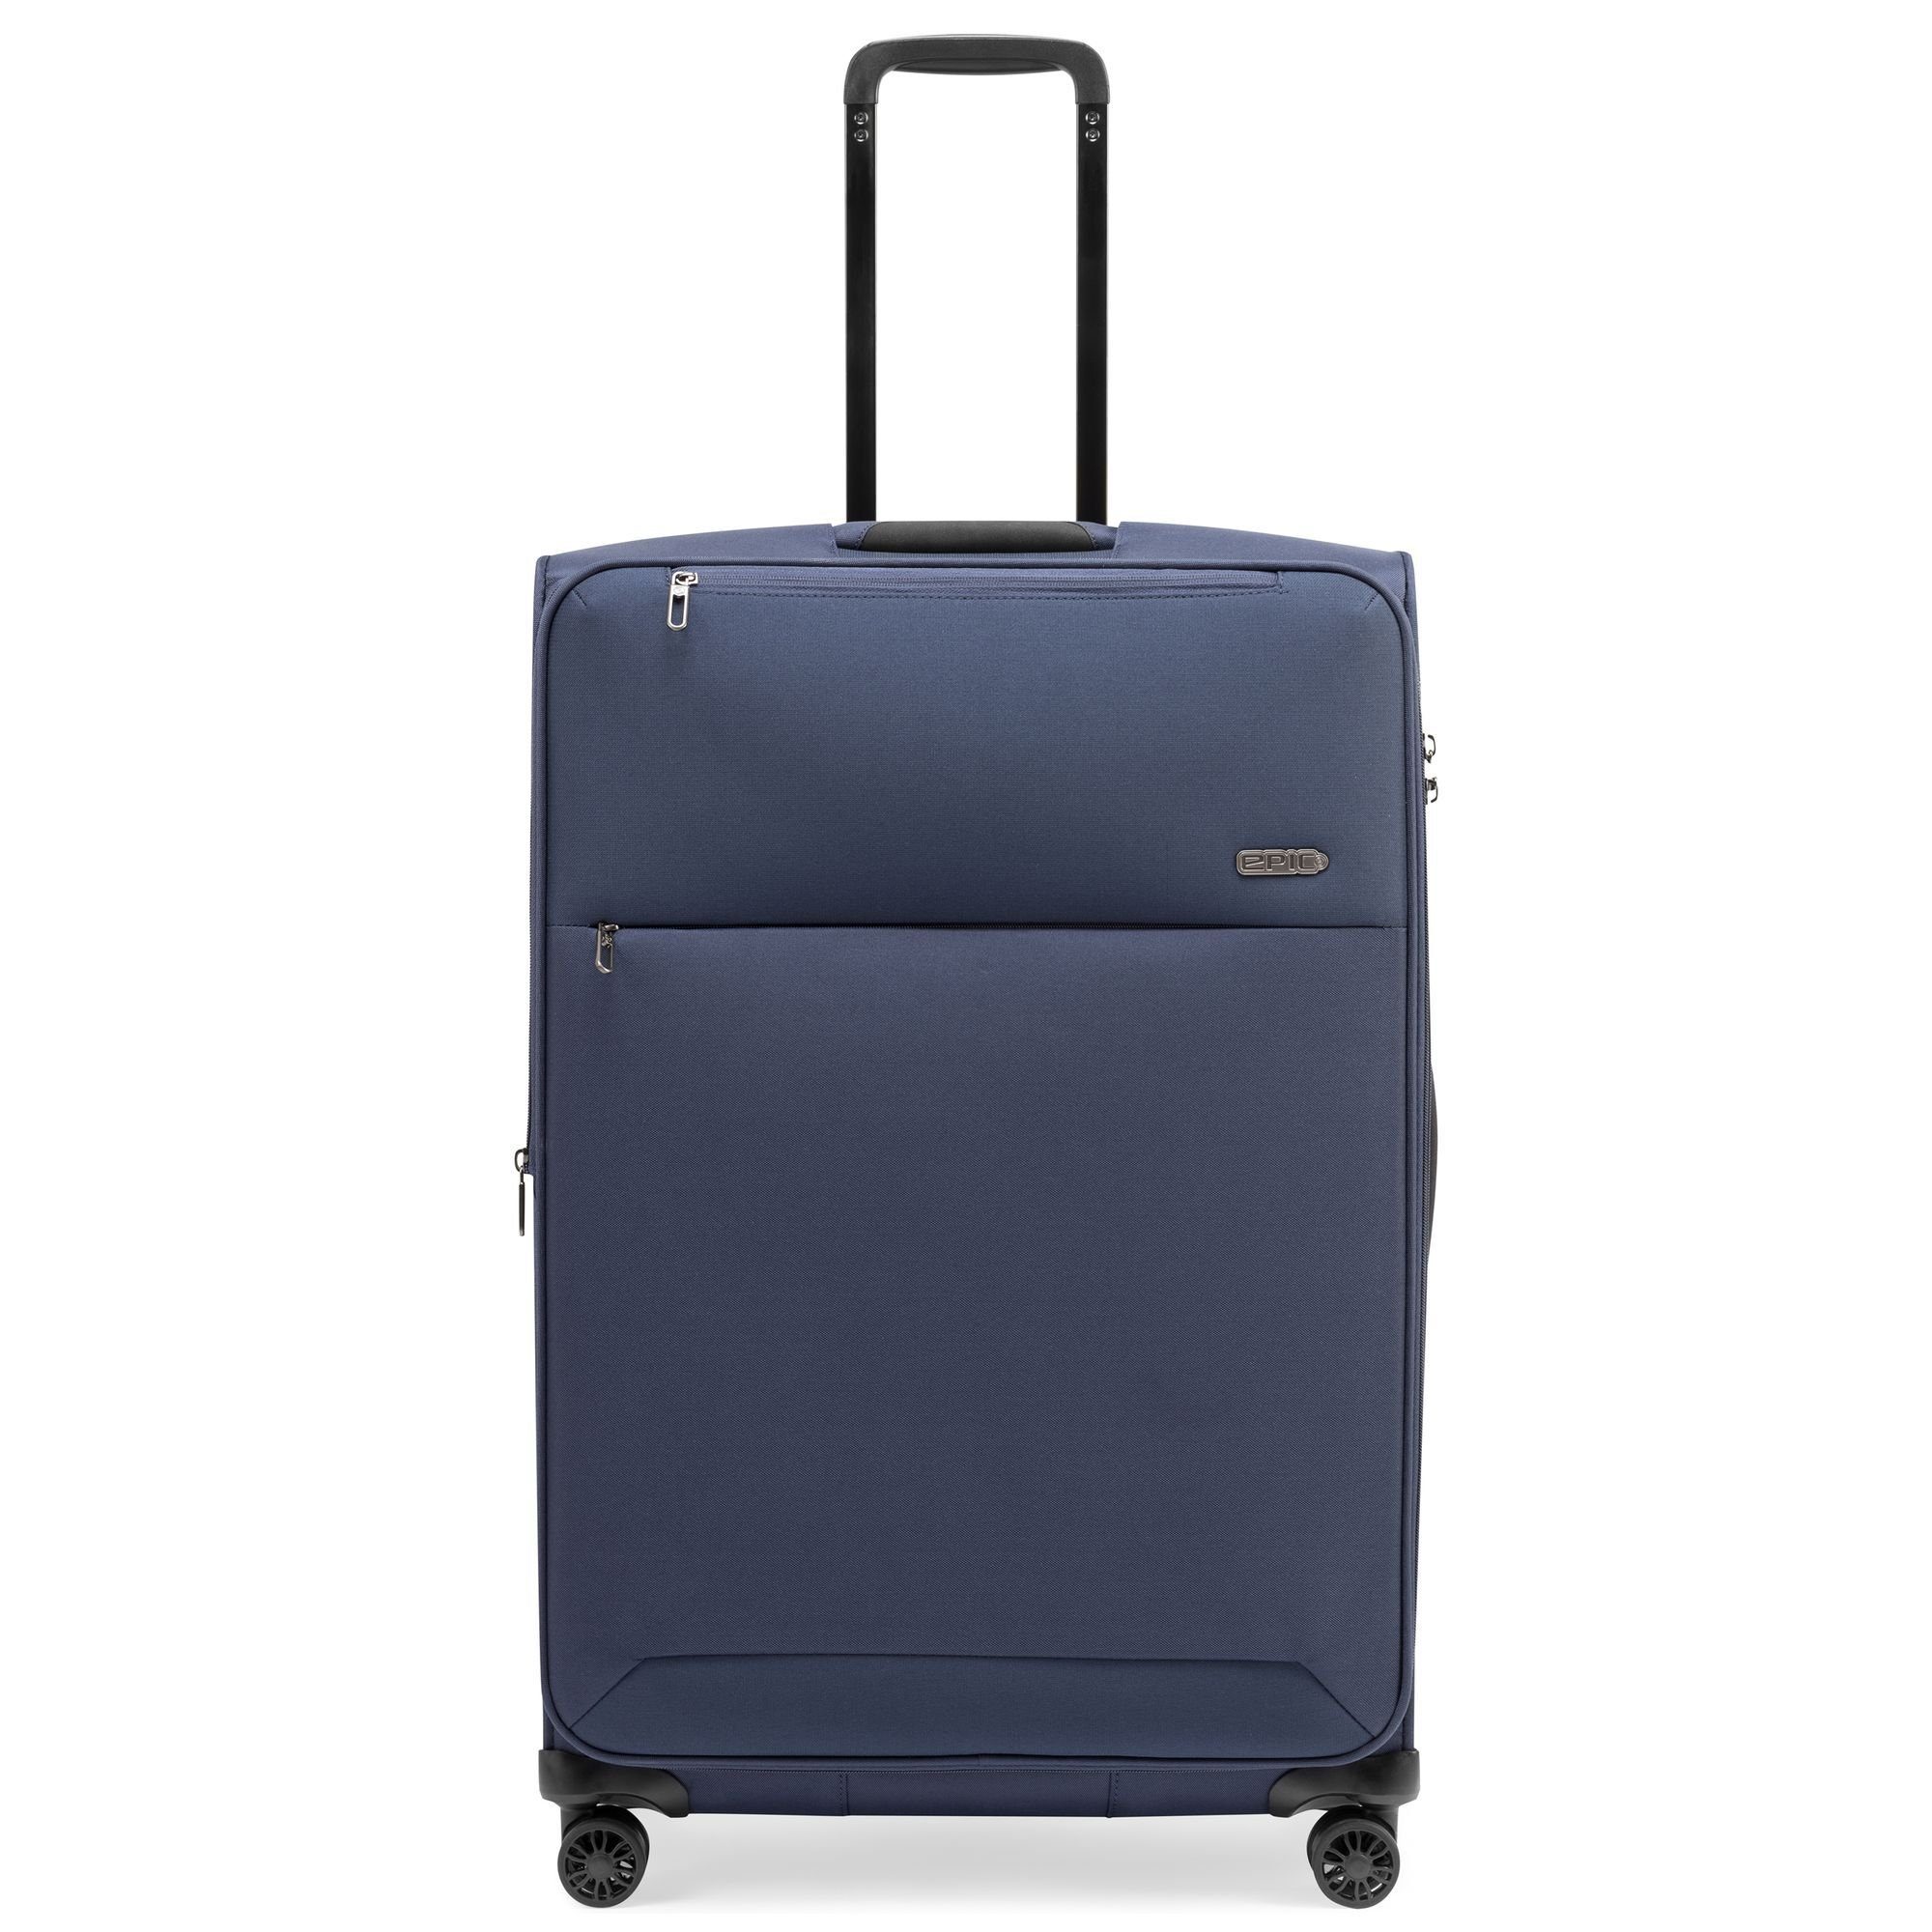 EPIC Trolley Discovery, 4 navyblue Polyester Rollen